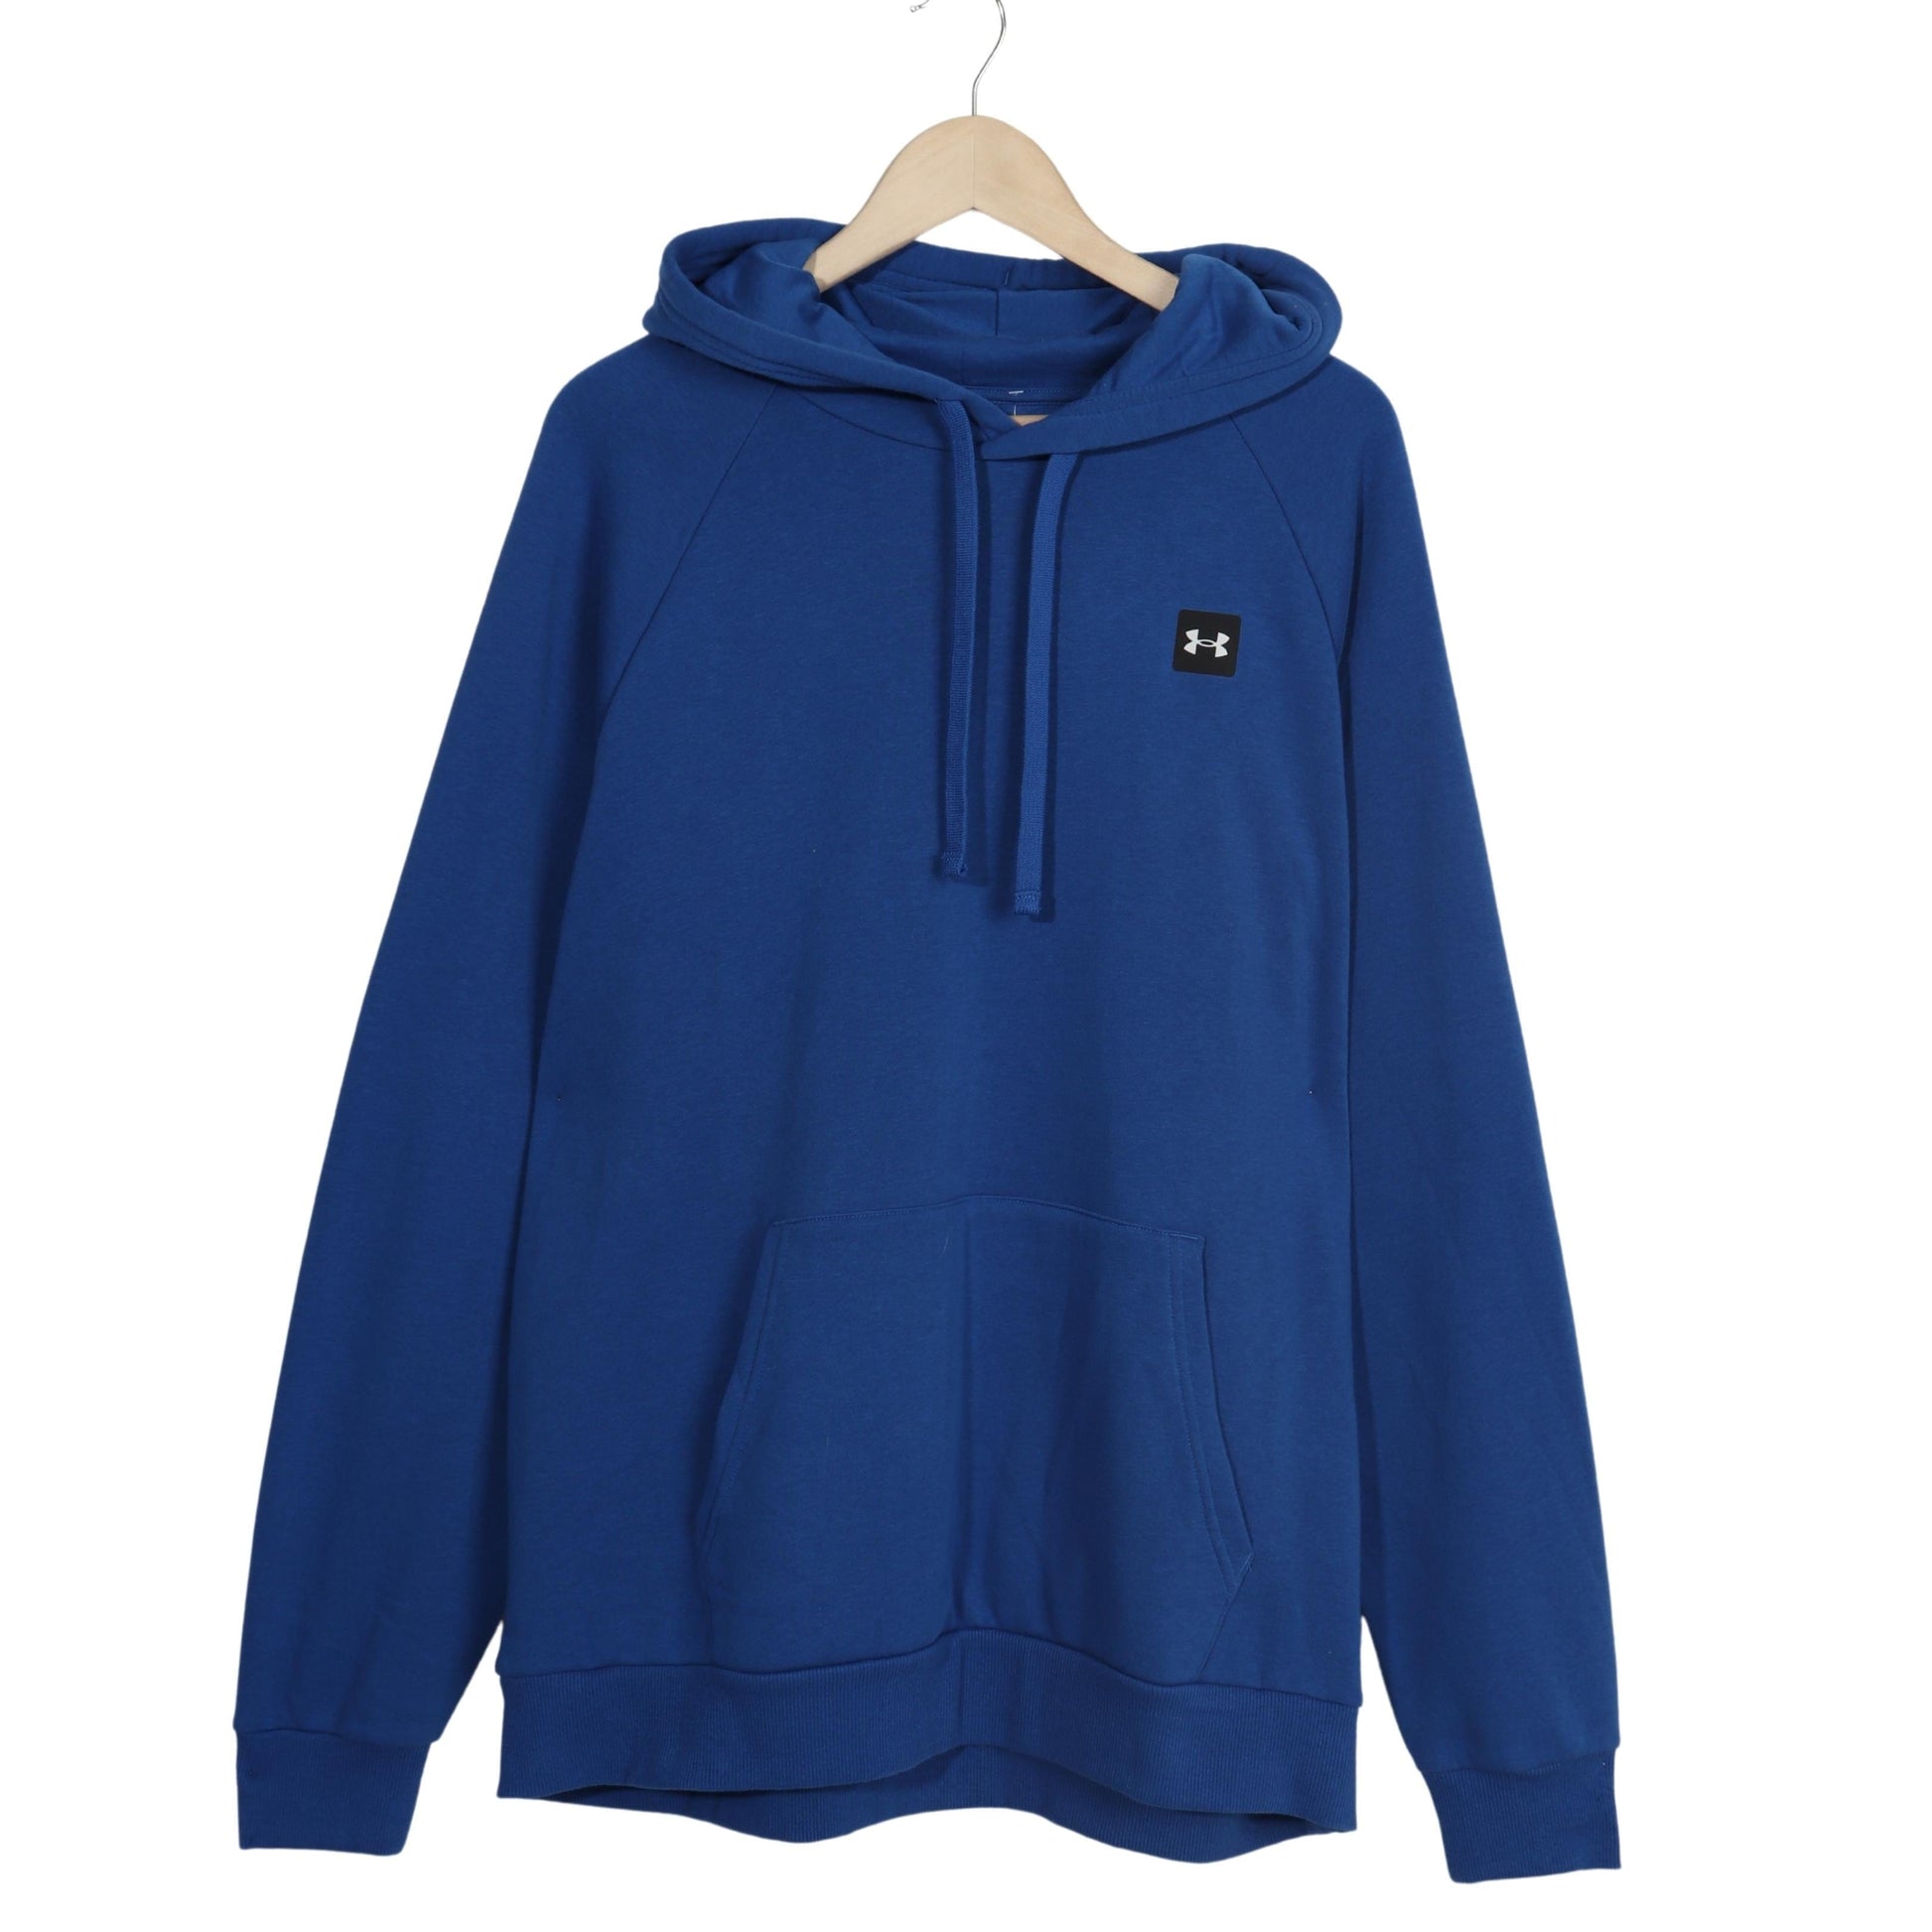 UNDER ARMOUR Mens Tops XL / Blue UNDER ARMOUR - Logo Printed Hooded